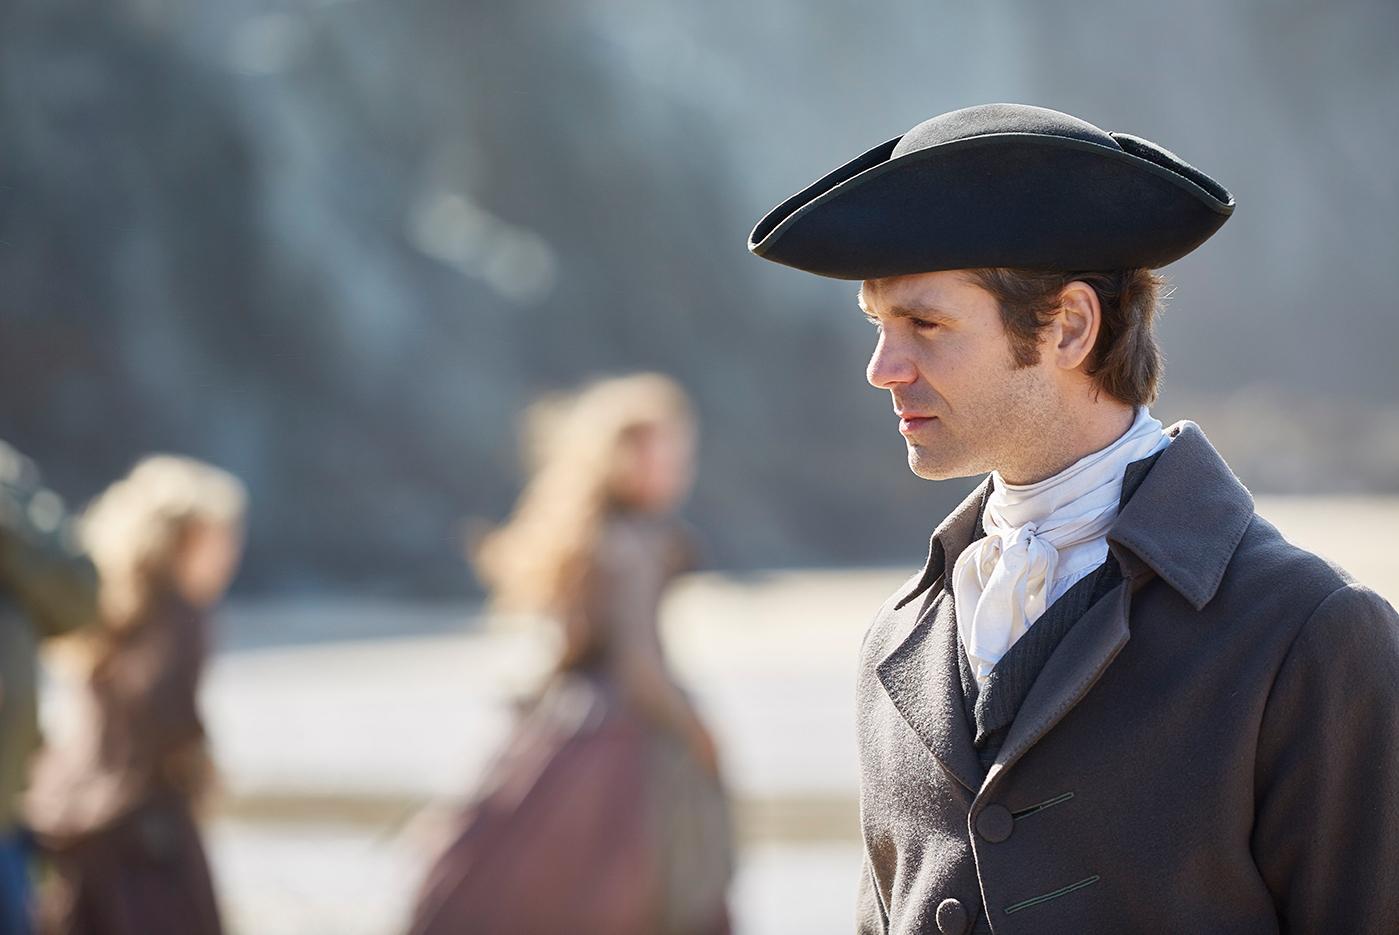 Luke Norris as Dwight in Poldark. Photo: Mammoth Screen for BBC and MASTERPIECE